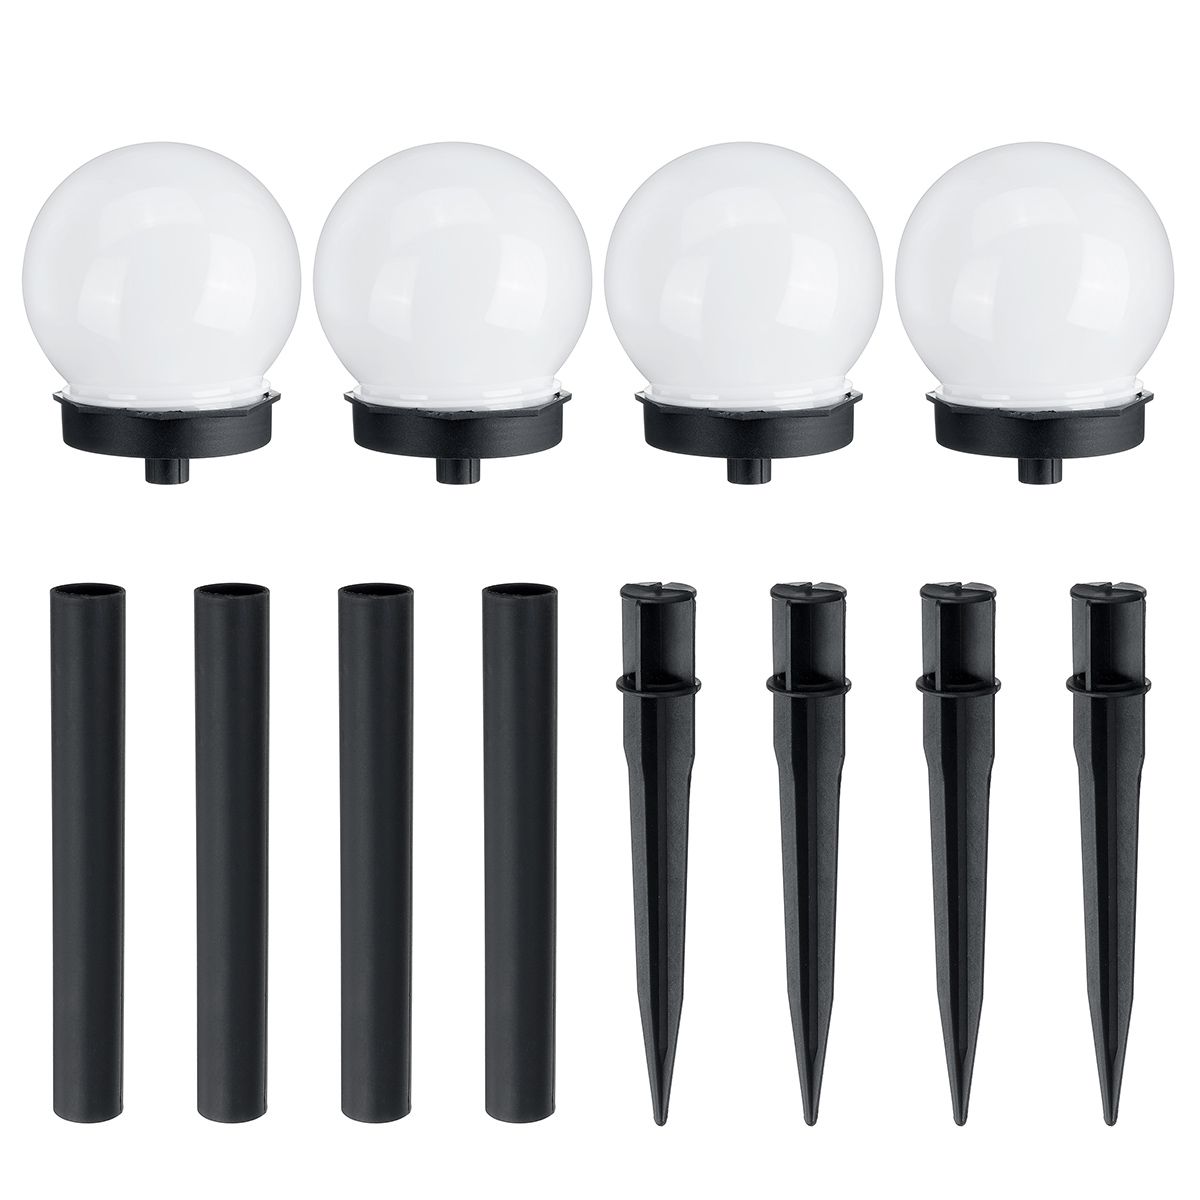 4PCS-LED-Solar-Ball-Lamp-Garden-Outdoor-Patio-Lawn-Yard-Light-with-Ground-Spike-1735561